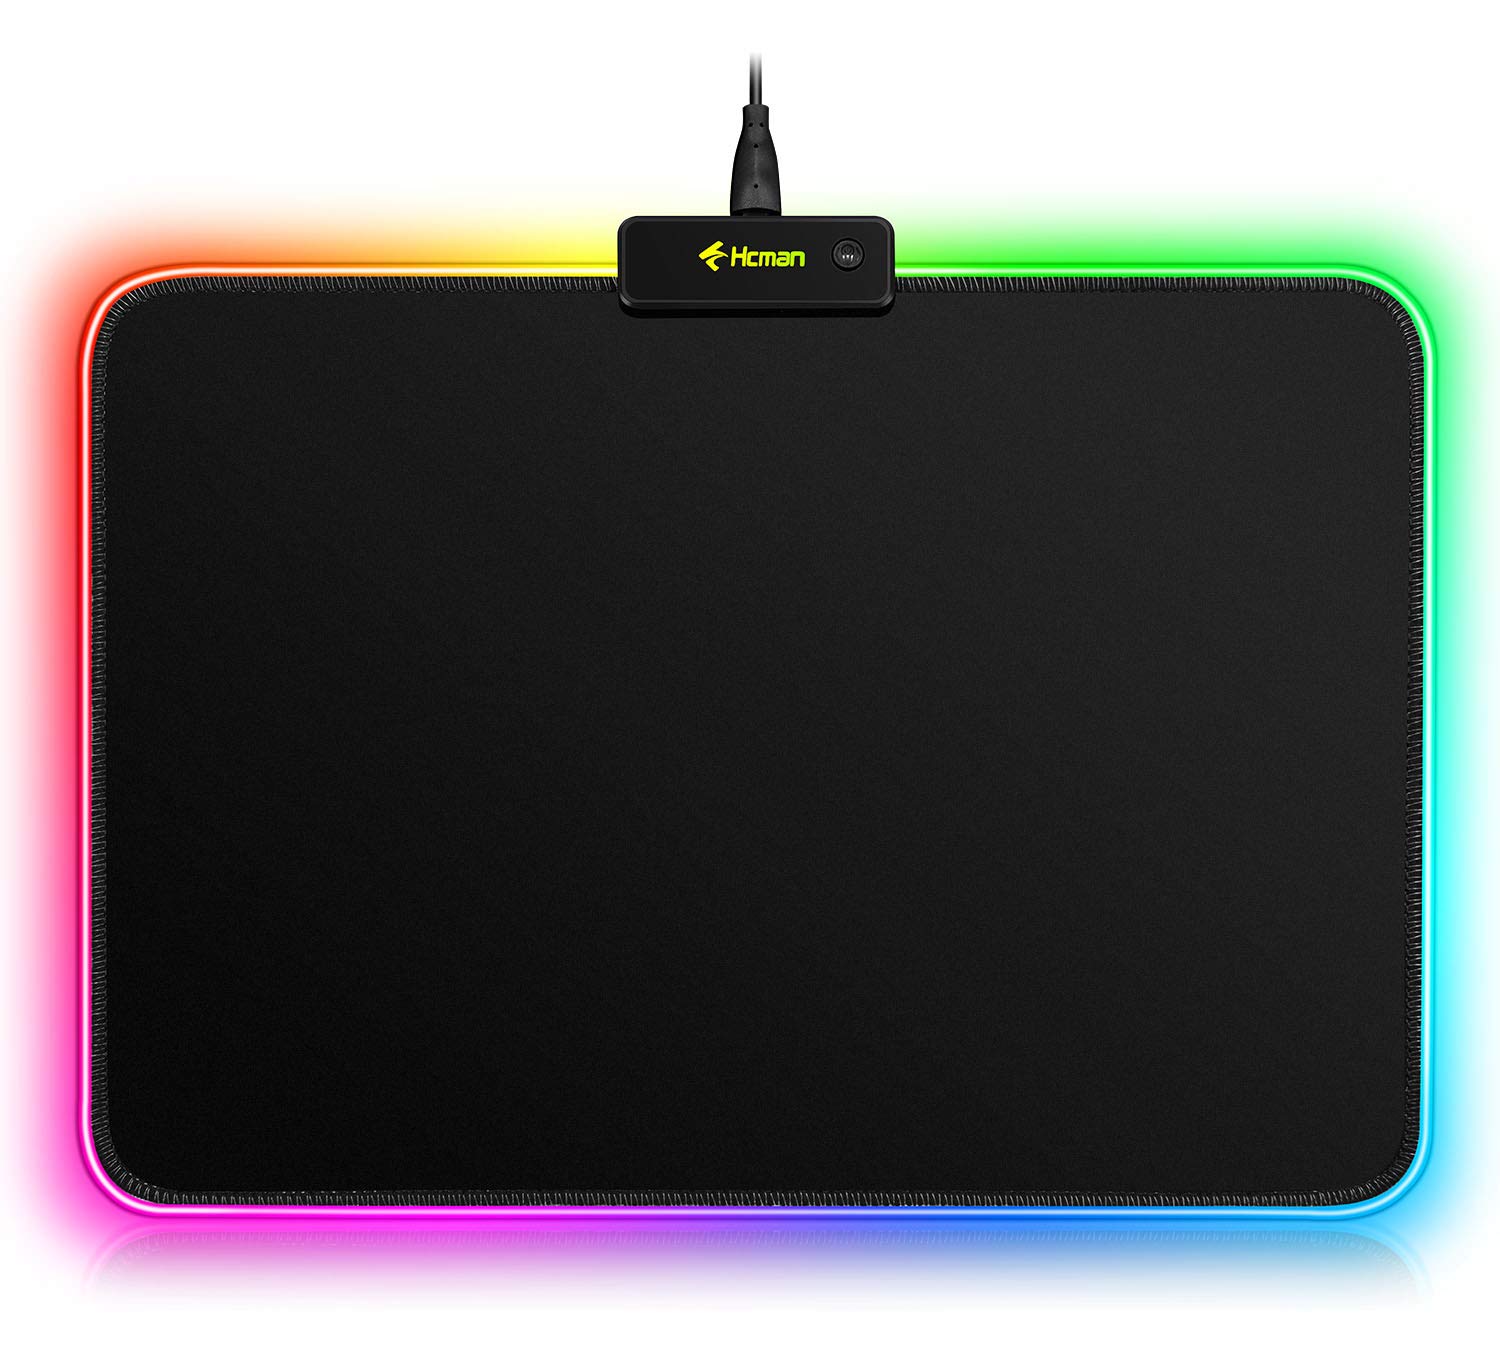 Hcman RGB Gaming Mouse Pad, Small Mousepad 340×245×3mm, PC Gaming Accessories LED Mouse Mat for Desk, Mouse Pads for Computer Gamer - Black